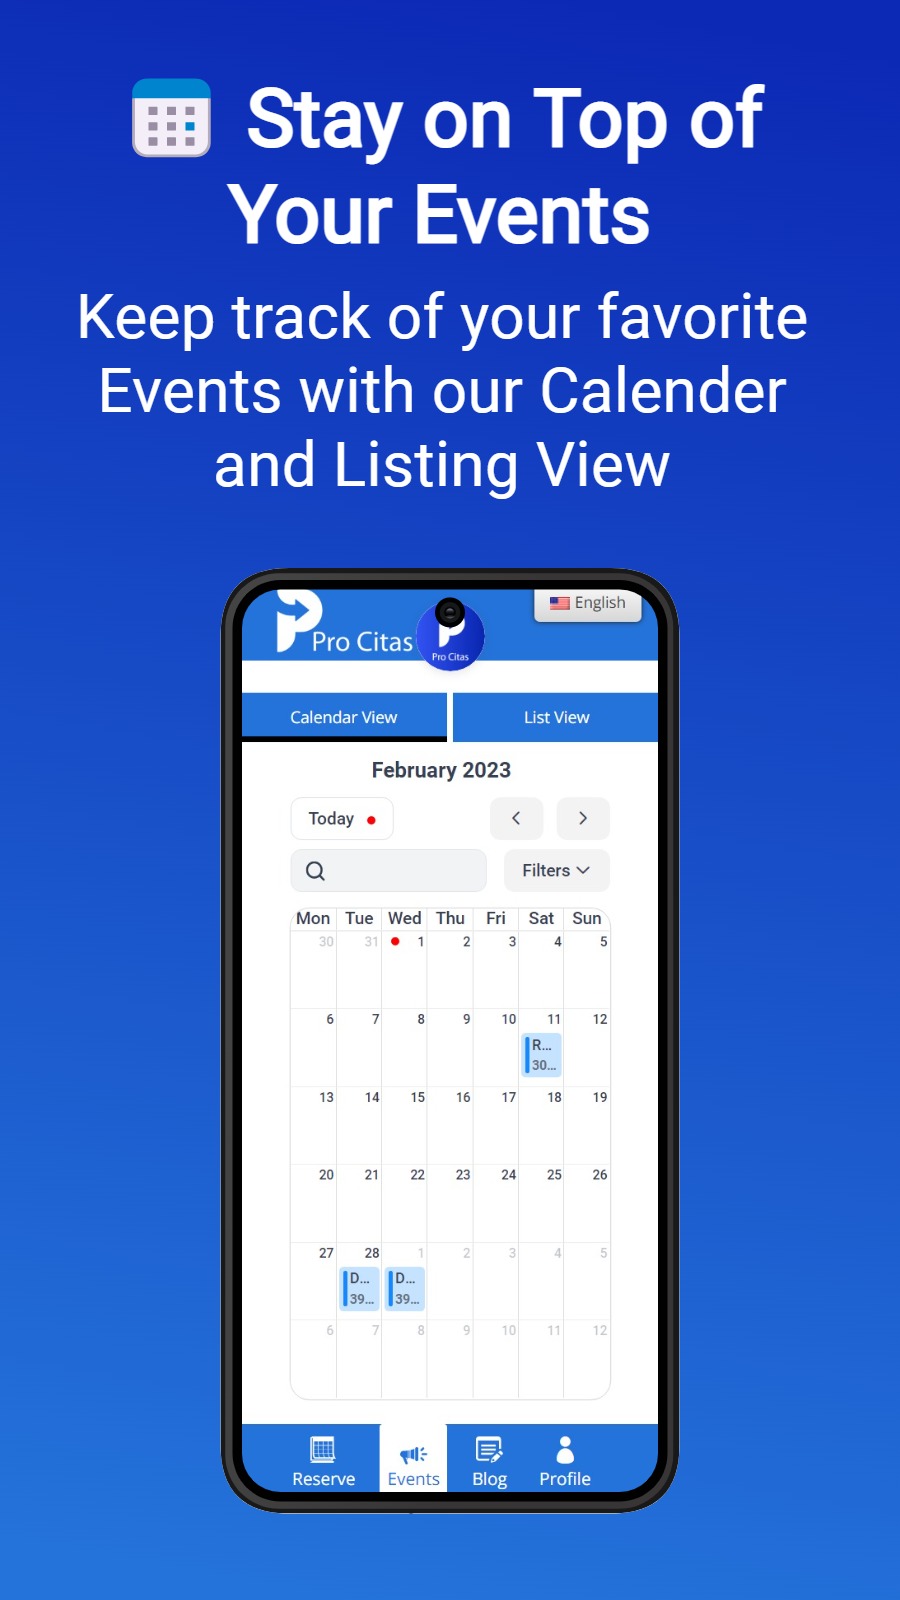 📅 Stay on Top of Your Events - Keep track of your favorite Events with our Calender and Listing View